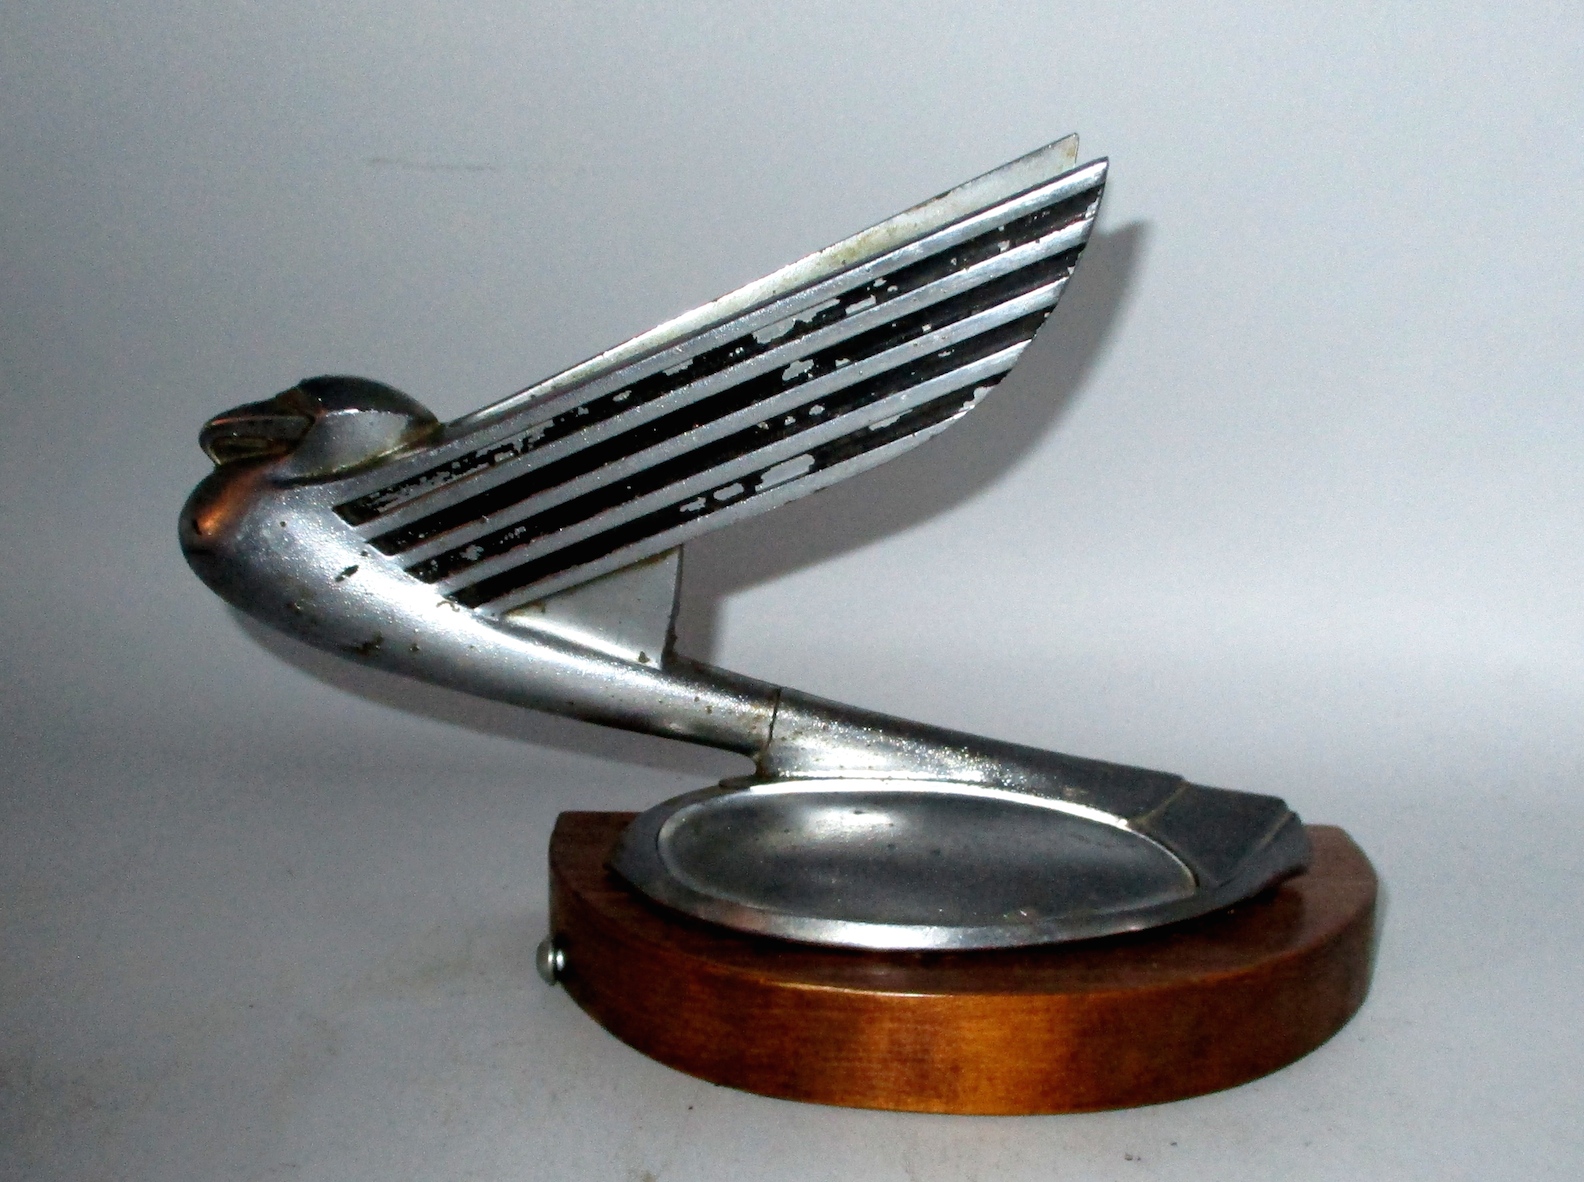 1935 Chevrolet After-market Eagle Hood Ornament (Repaired)